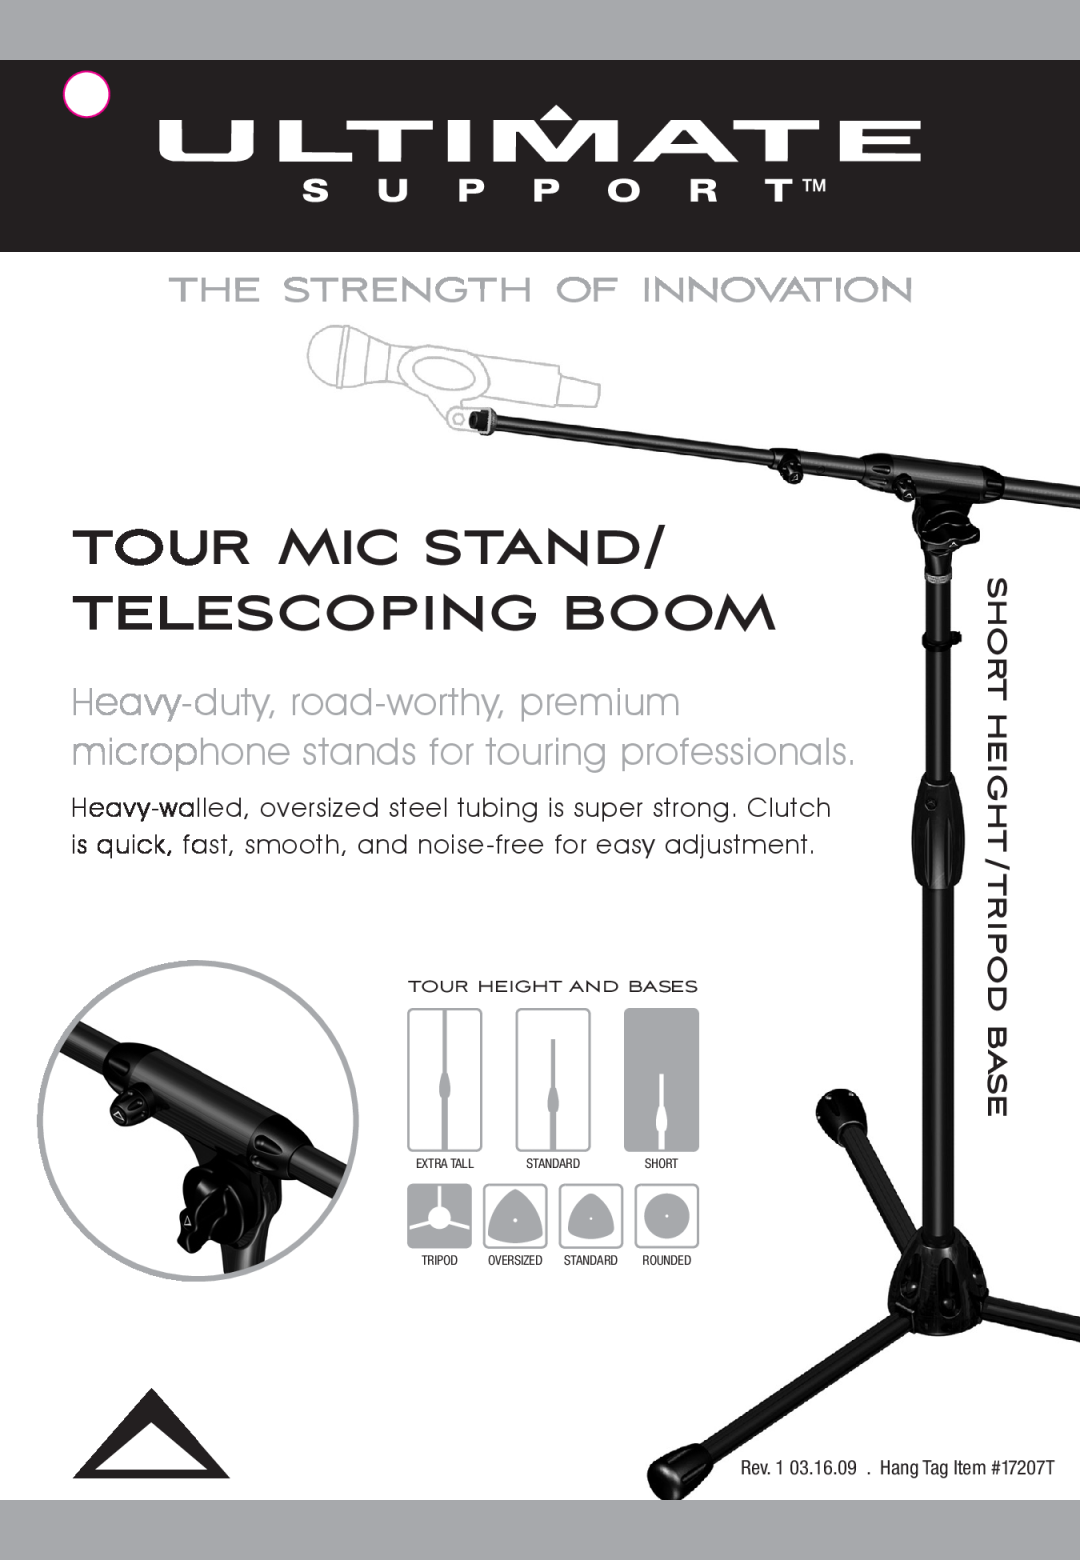 Ultimate Support Systems 17207T manual Tour Mic Stand/ Telescoping Boom, Short Height /Tripod Base, Tour Height And Bases 